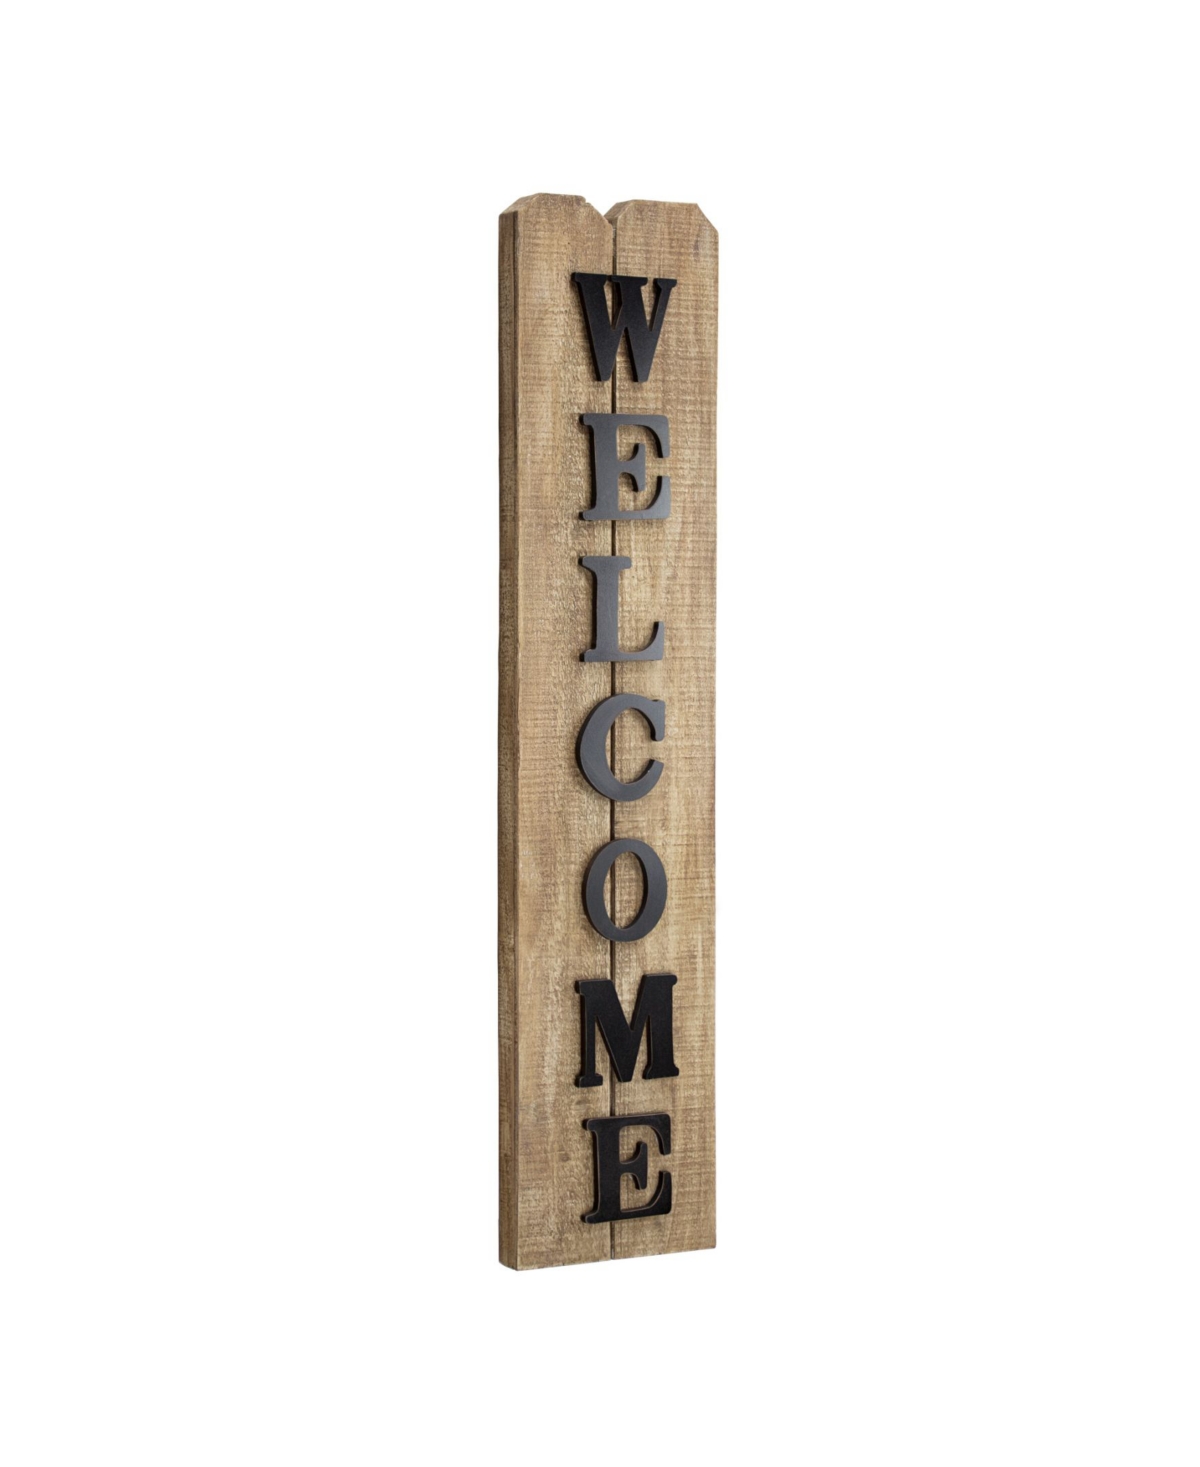 Crystal Art Gallery American Art Decor Rustic Wood Welcome Sign In Brown